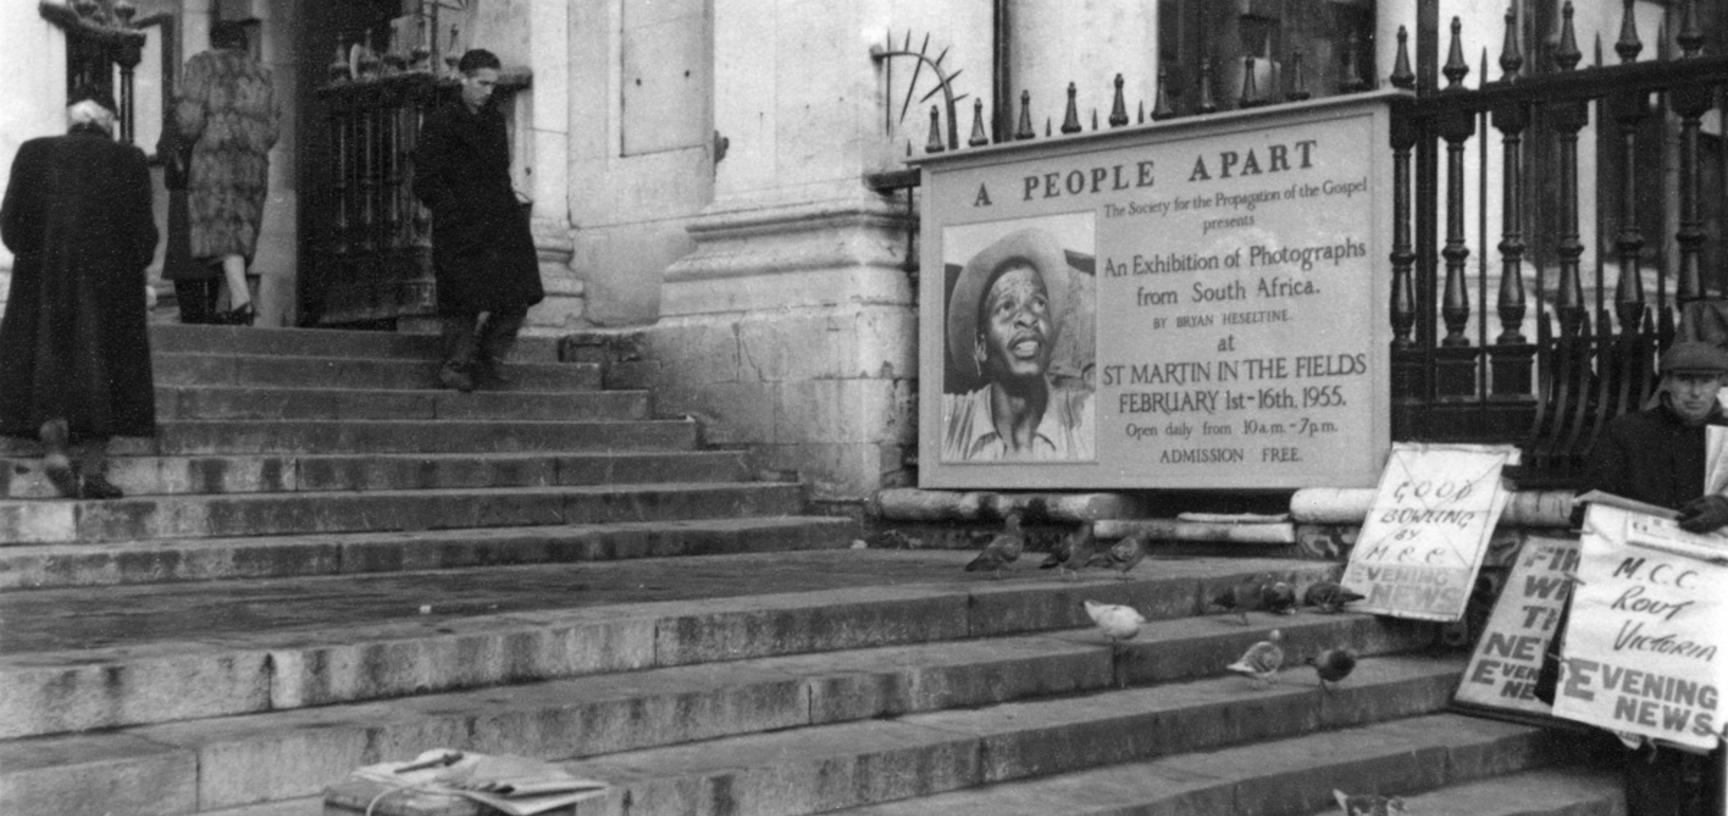 ‘A People Apart’ at the church of St Martin-in-the-Fields, London. February 1955.